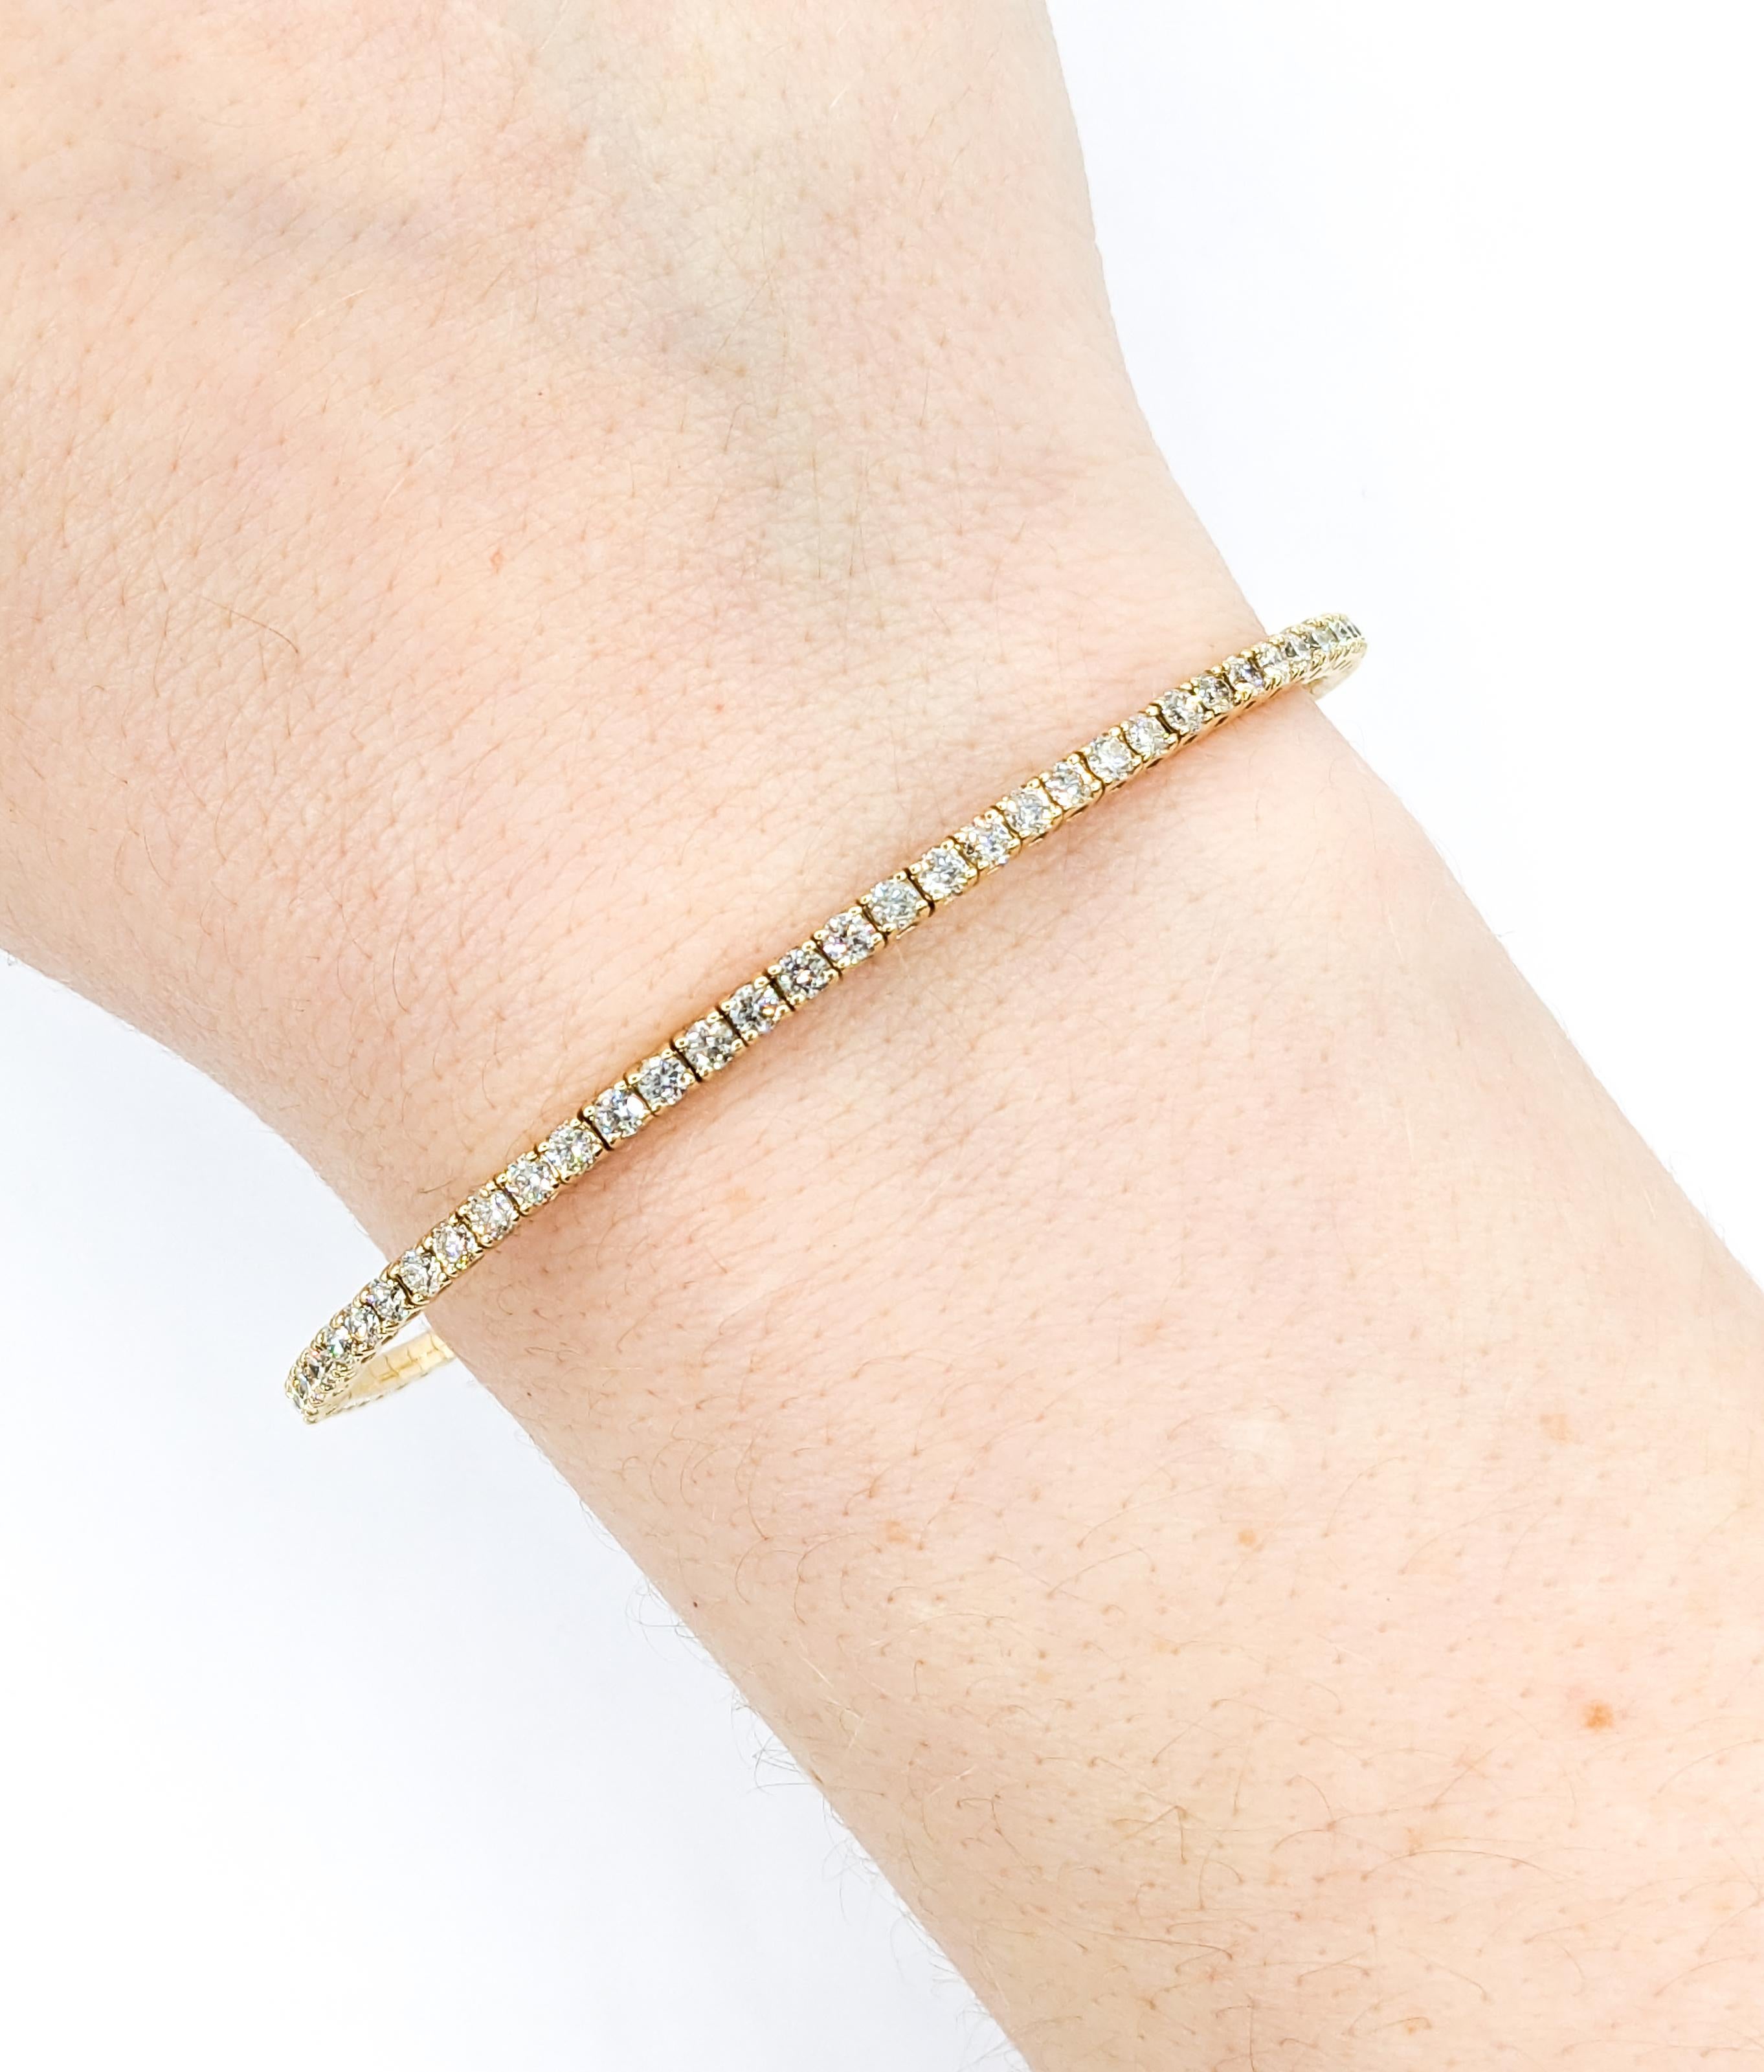 1.47ctw Diamond Bracelet In Yellow Gold


This elegant bracelet, masterfully crafted in 14kt yellow gold, boasts a classic bangle design adorned with 1.47ctw of dazzling diamonds. These gems, with their SI2-I1 clarity and I color, sparkle with every